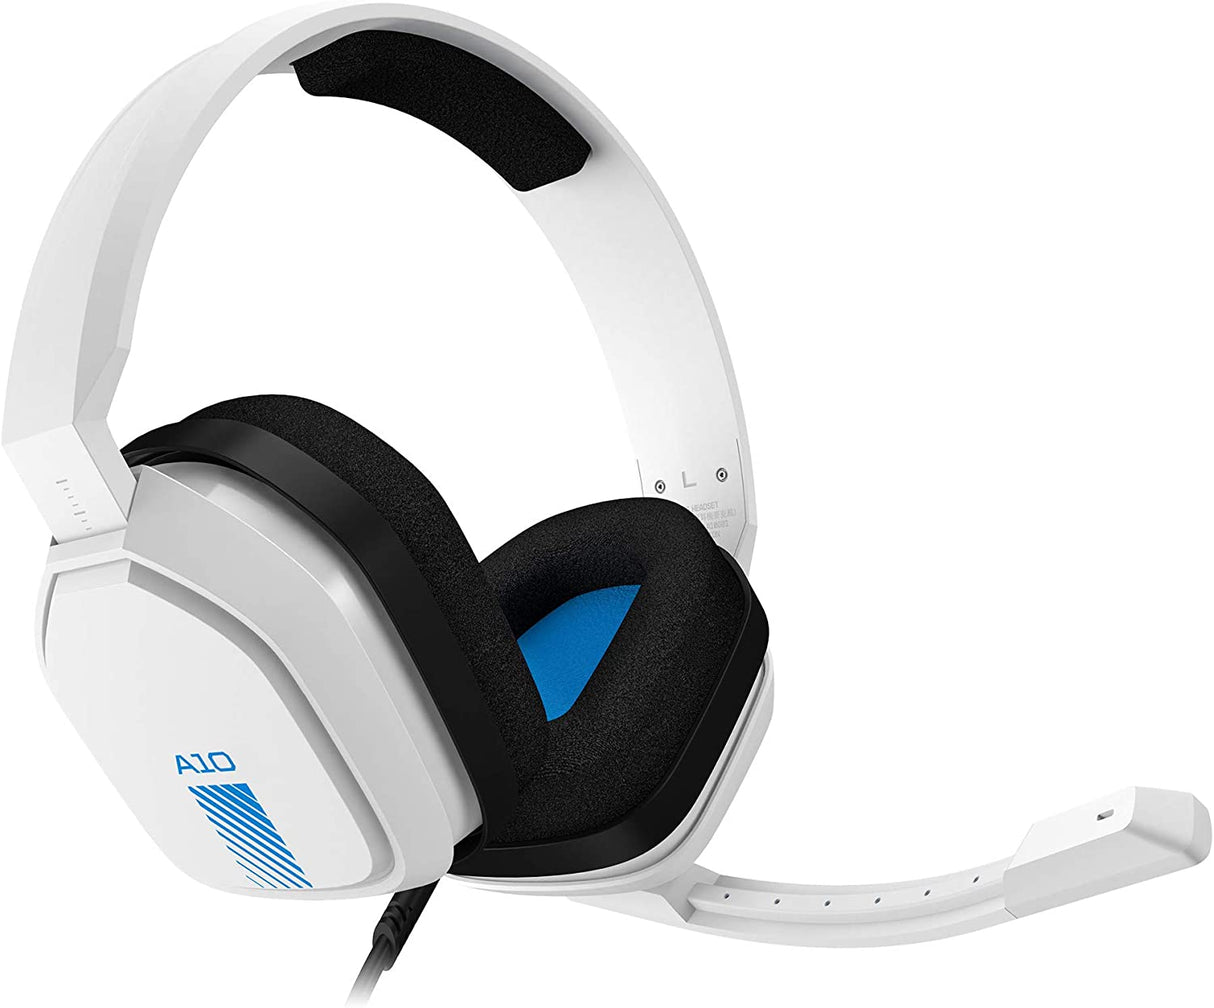 ASTRO Gaming A10 Wired Gaming Headset, Lightweight and Damage Resistant, ASTRO Audio, 3.5 mm Audio Jack, for Xbox Series X|S, Xbox One, PS5, PS4, Nintendo Switch, PC, Mac- White/Blue White Gen 1 Playstation/PC Headset Only